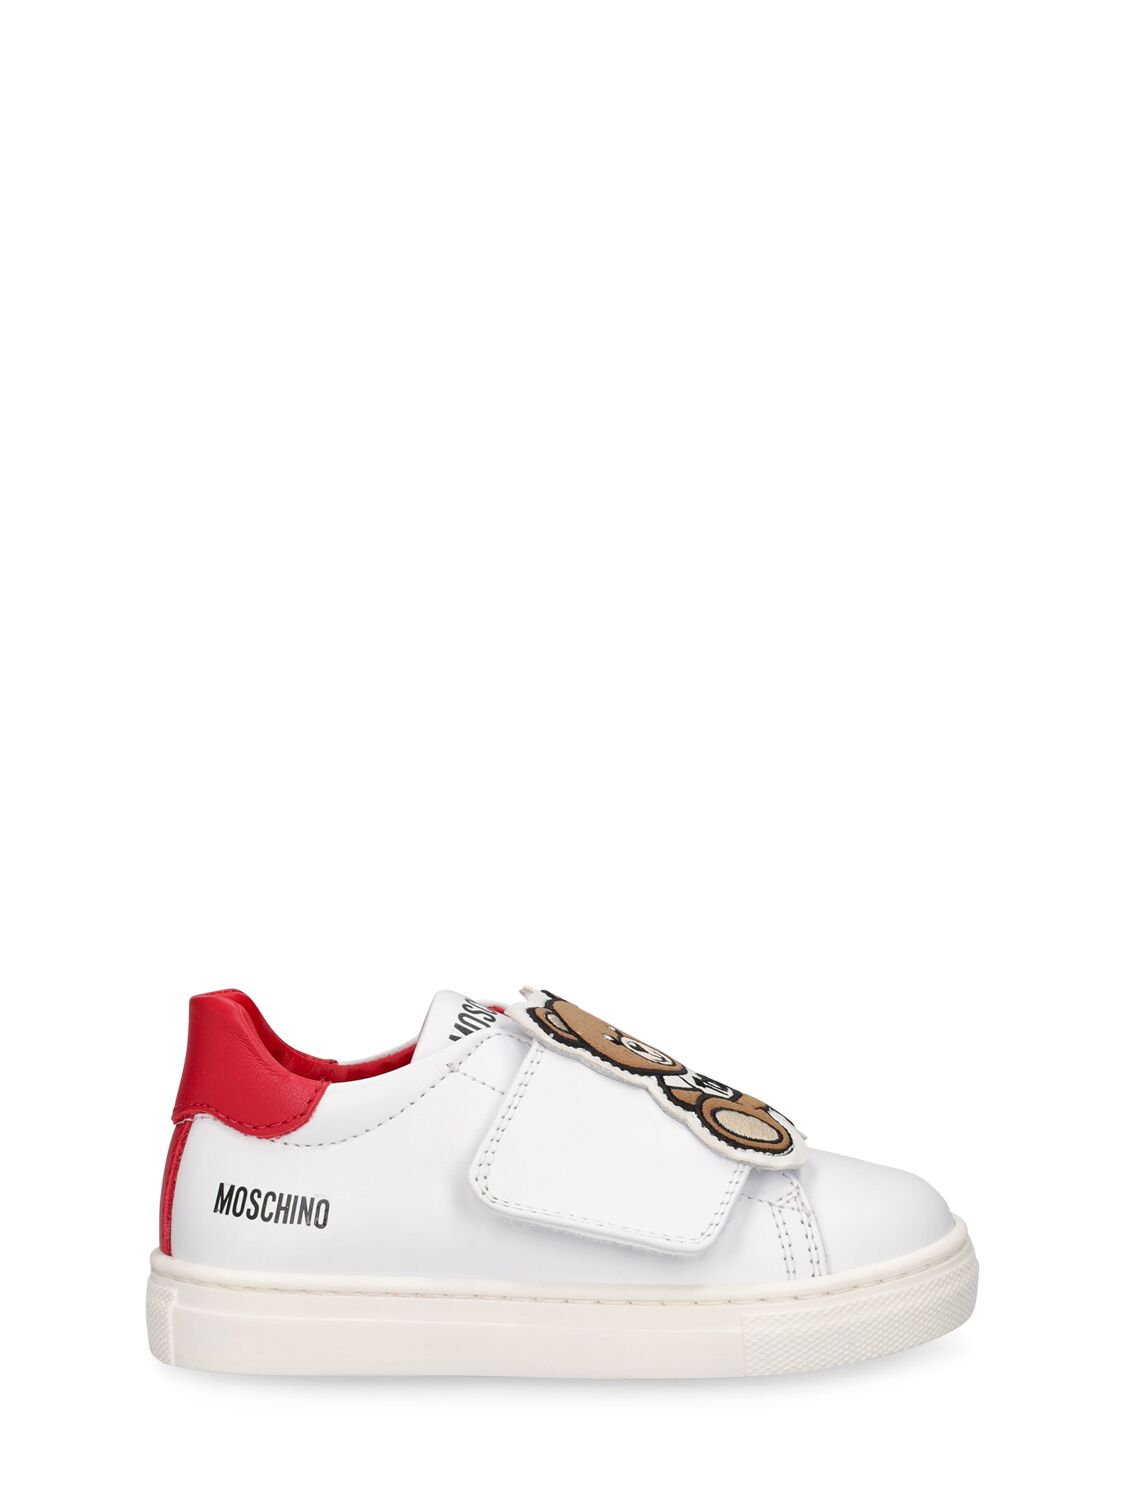 Moschino Kids' Teddy Patch Leather Strap Sneakers In White,red